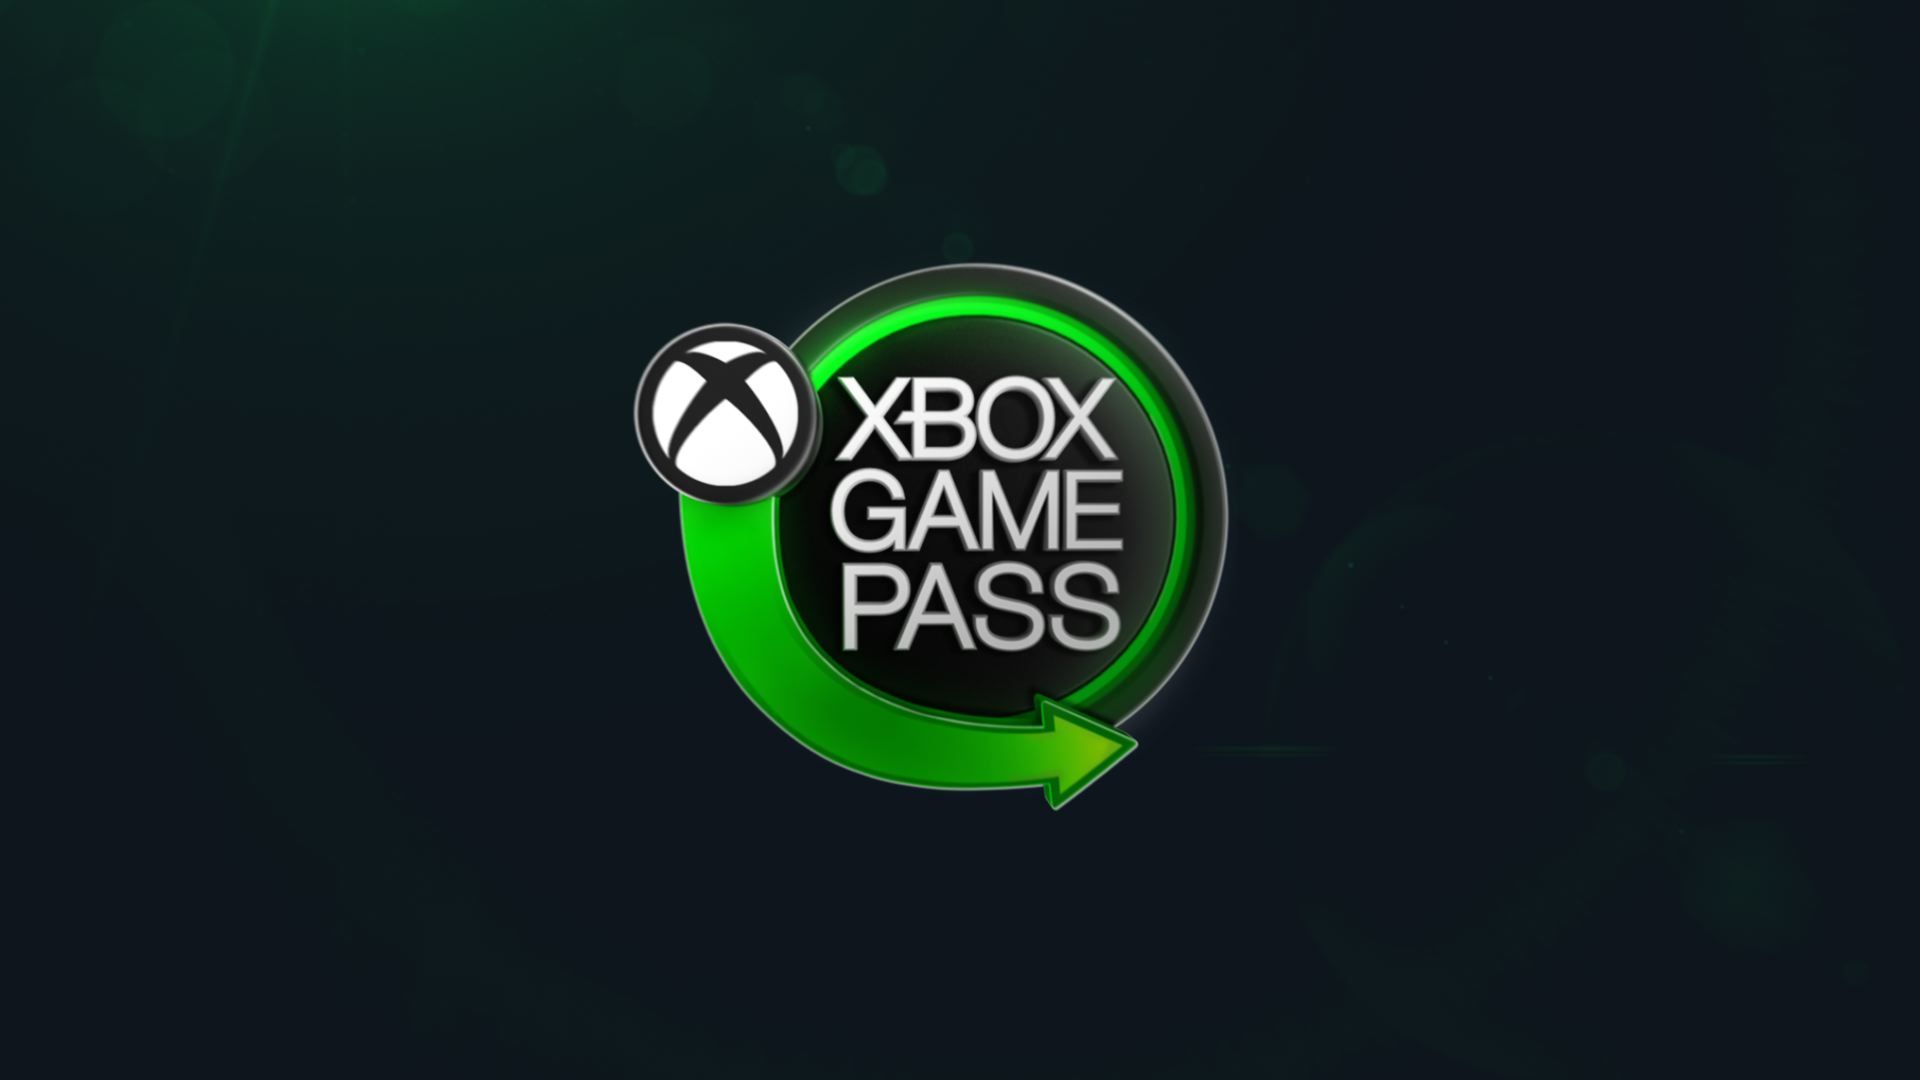 How Can Playstation 5 Beat Xbox Game Pass?